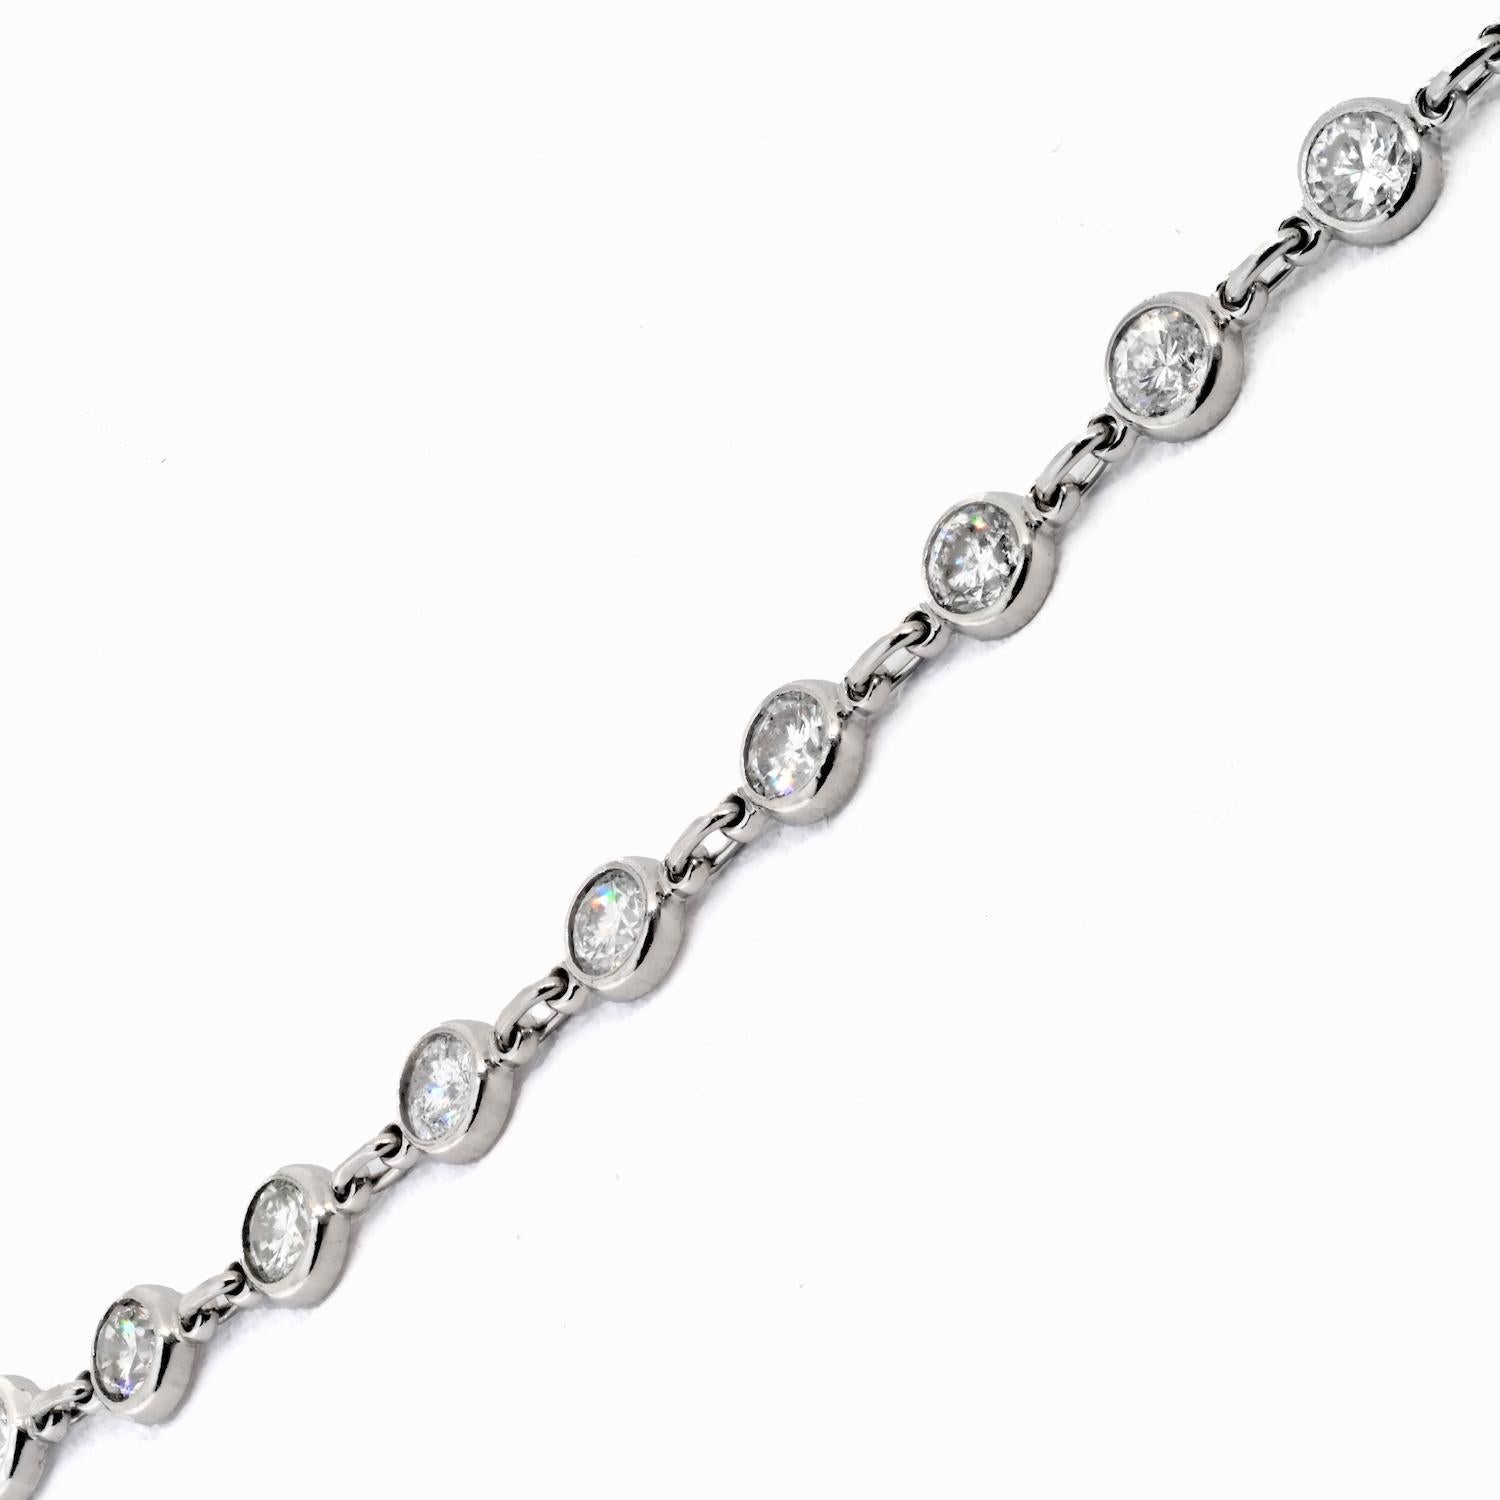 18K White Gold 6.17cttw Diamond By The Yard 16 Inch Chain Necklace In Excellent Condition For Sale In New York, NY